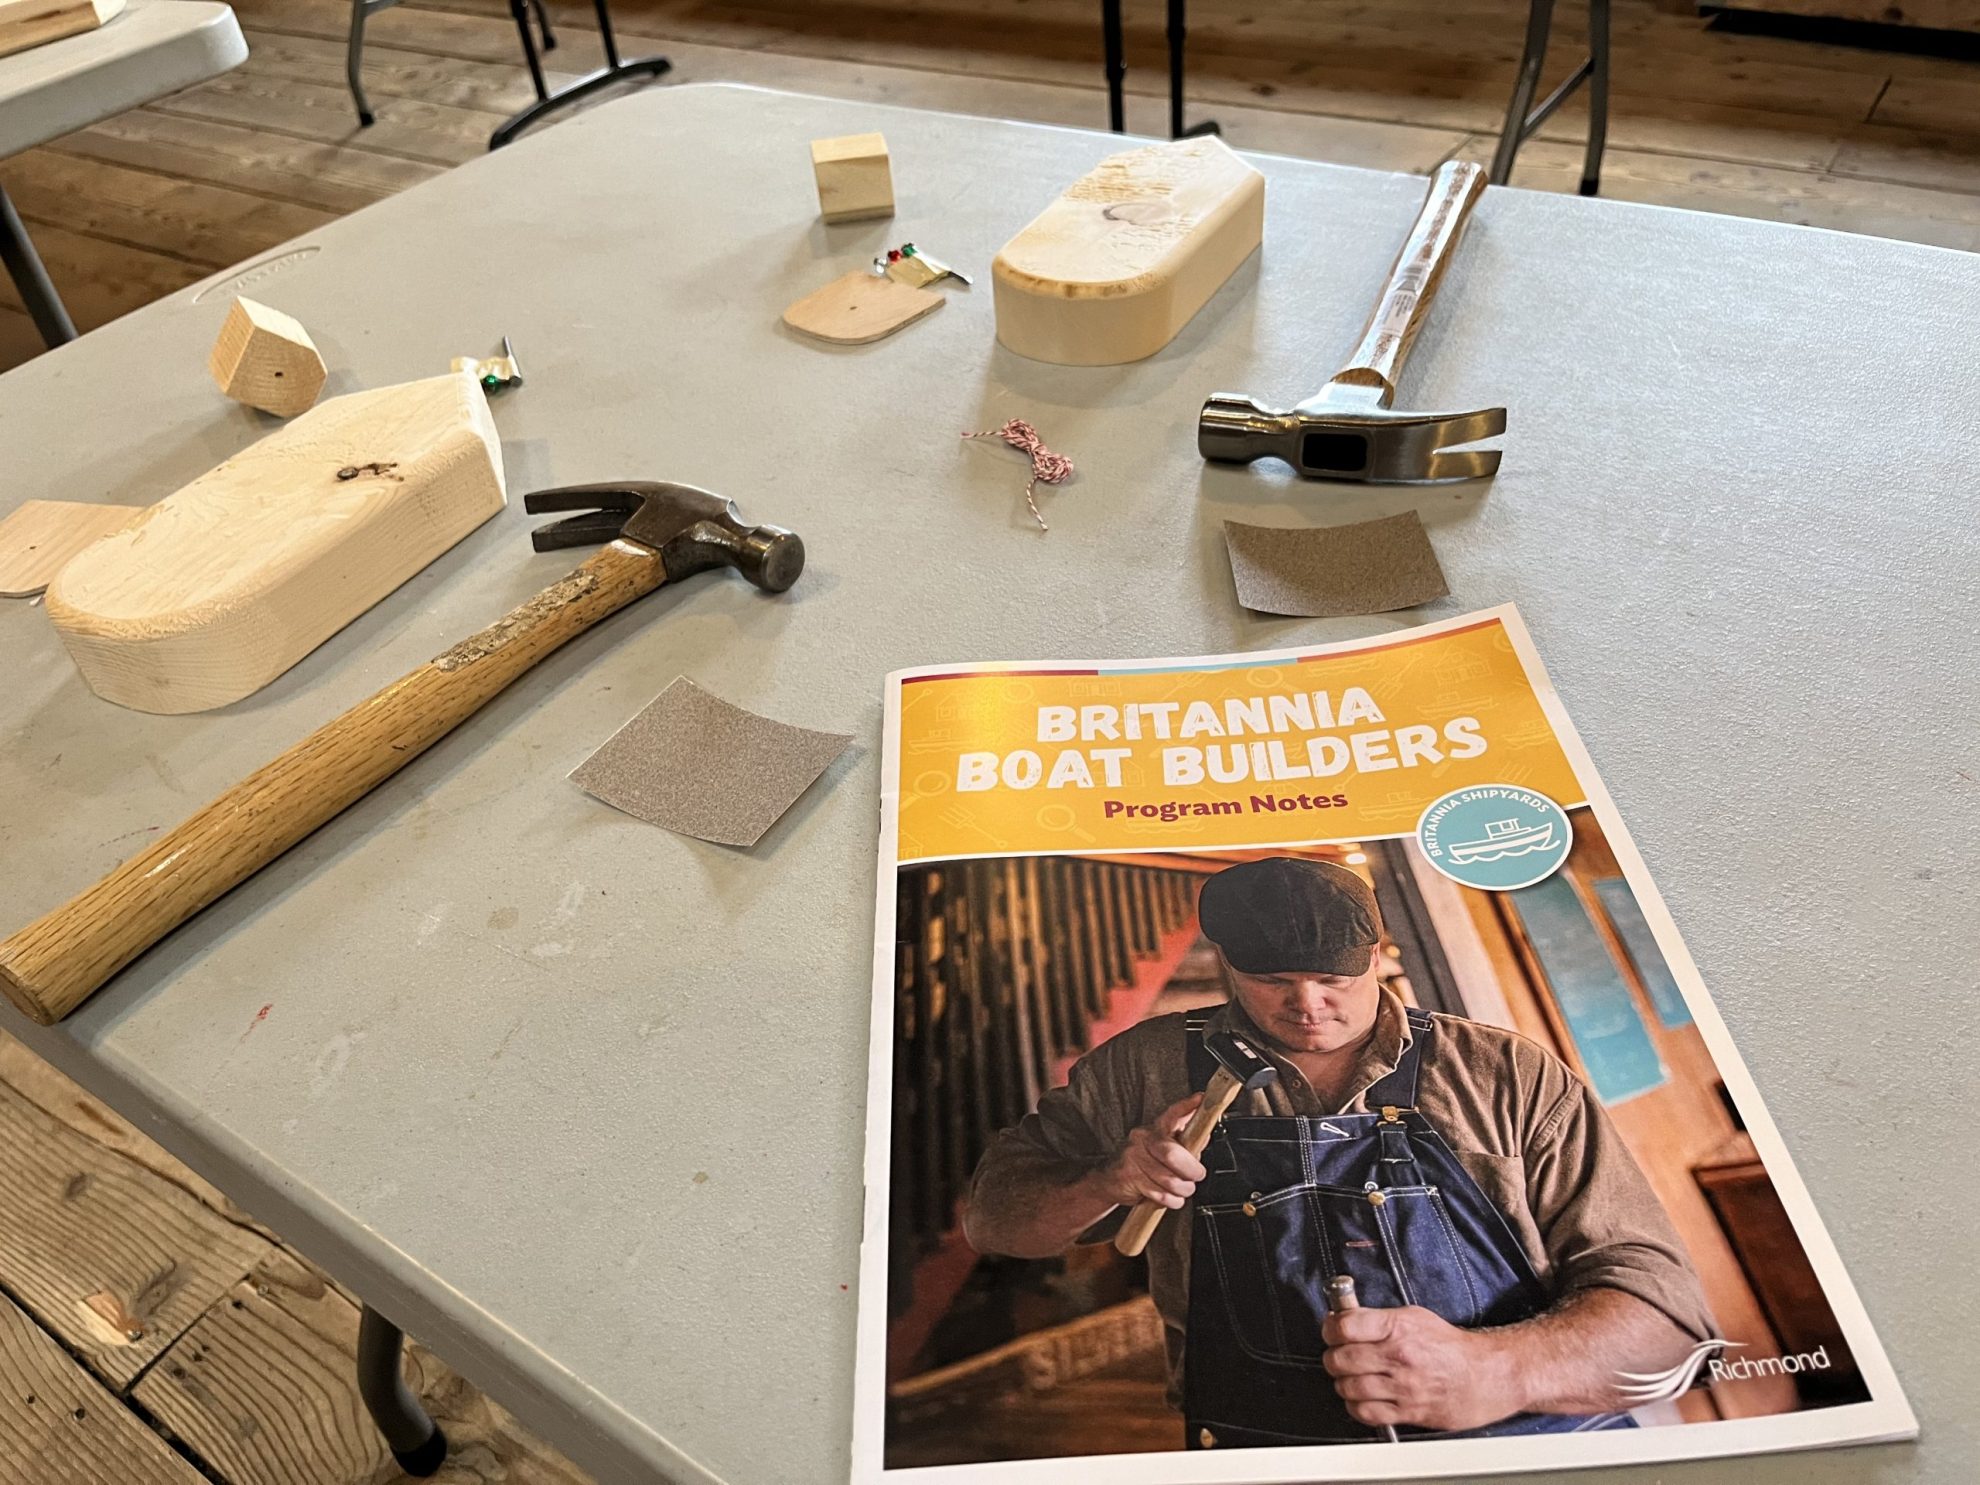 White table with two hammers, blocks of wood and sandpaper, along with a booklet that reads: Britannia Boat Builders Program Notes